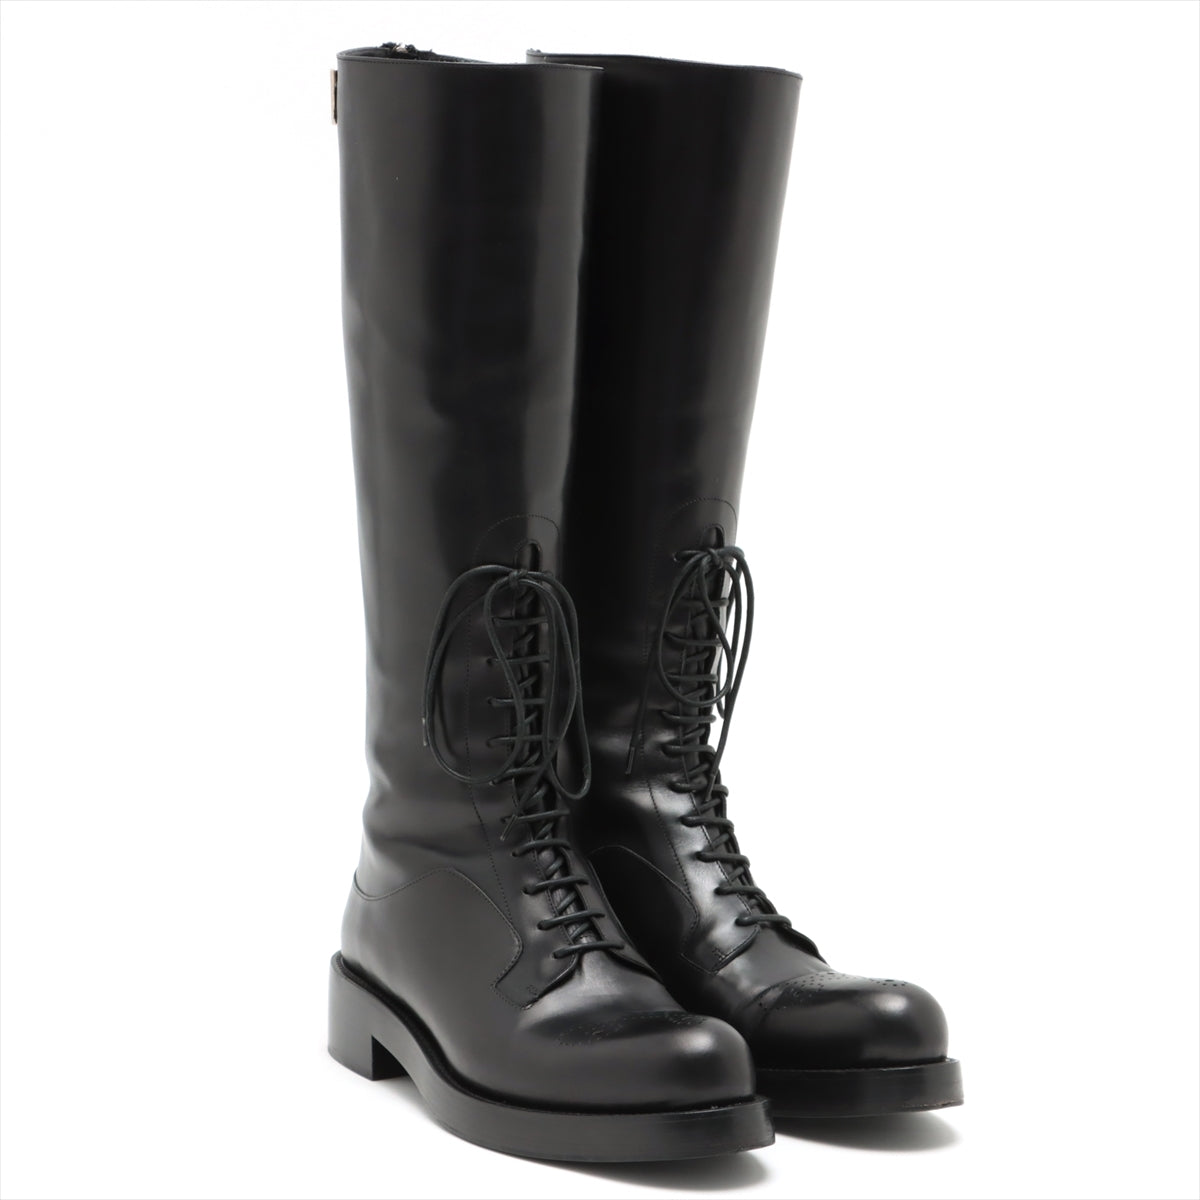 Prada Leather Long boots 38 Ladies' Black Lace up